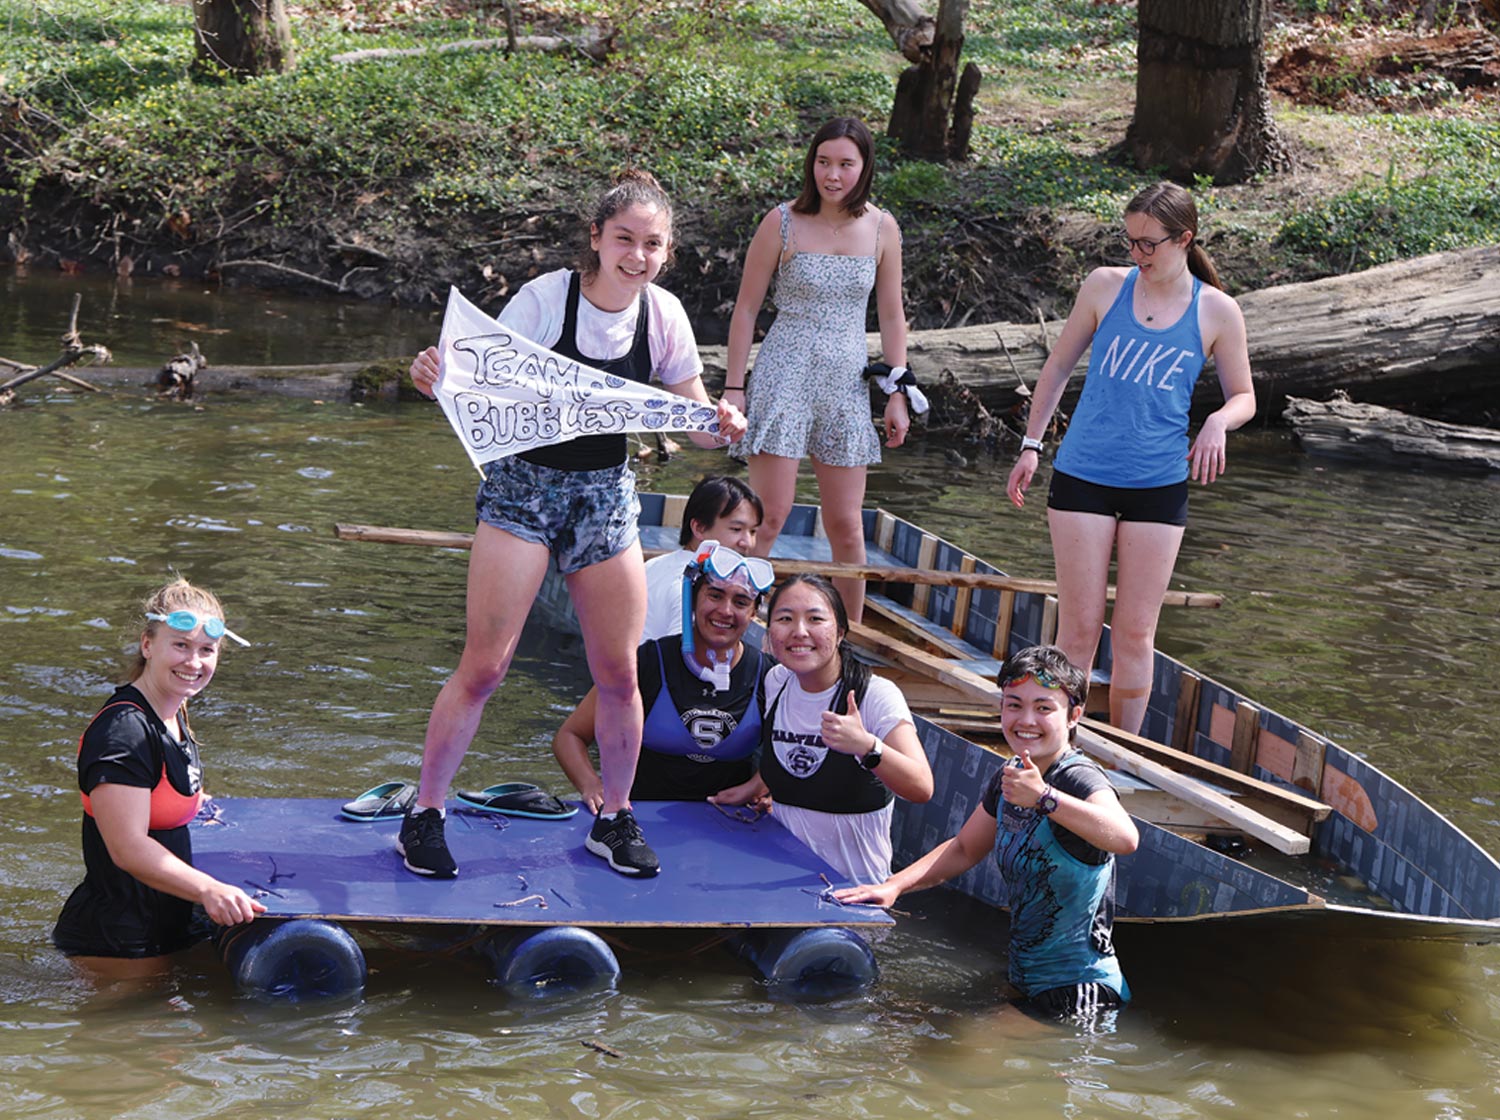 Young people on a raft in a creek hold flags and smile.